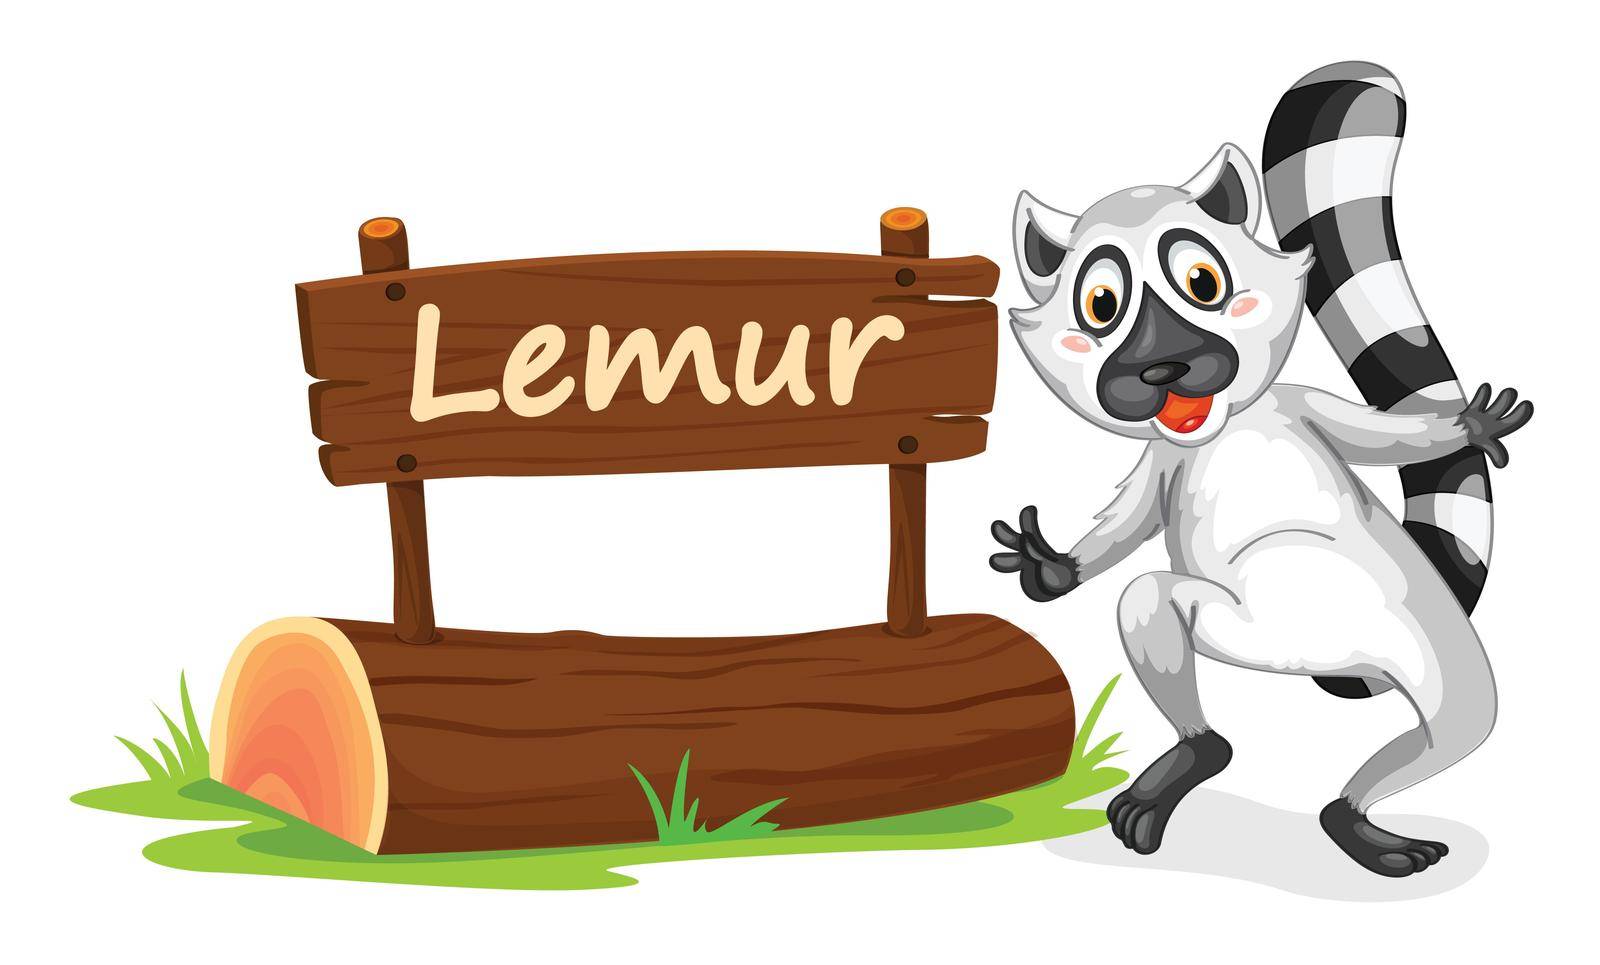 lemur and name plate by iimages